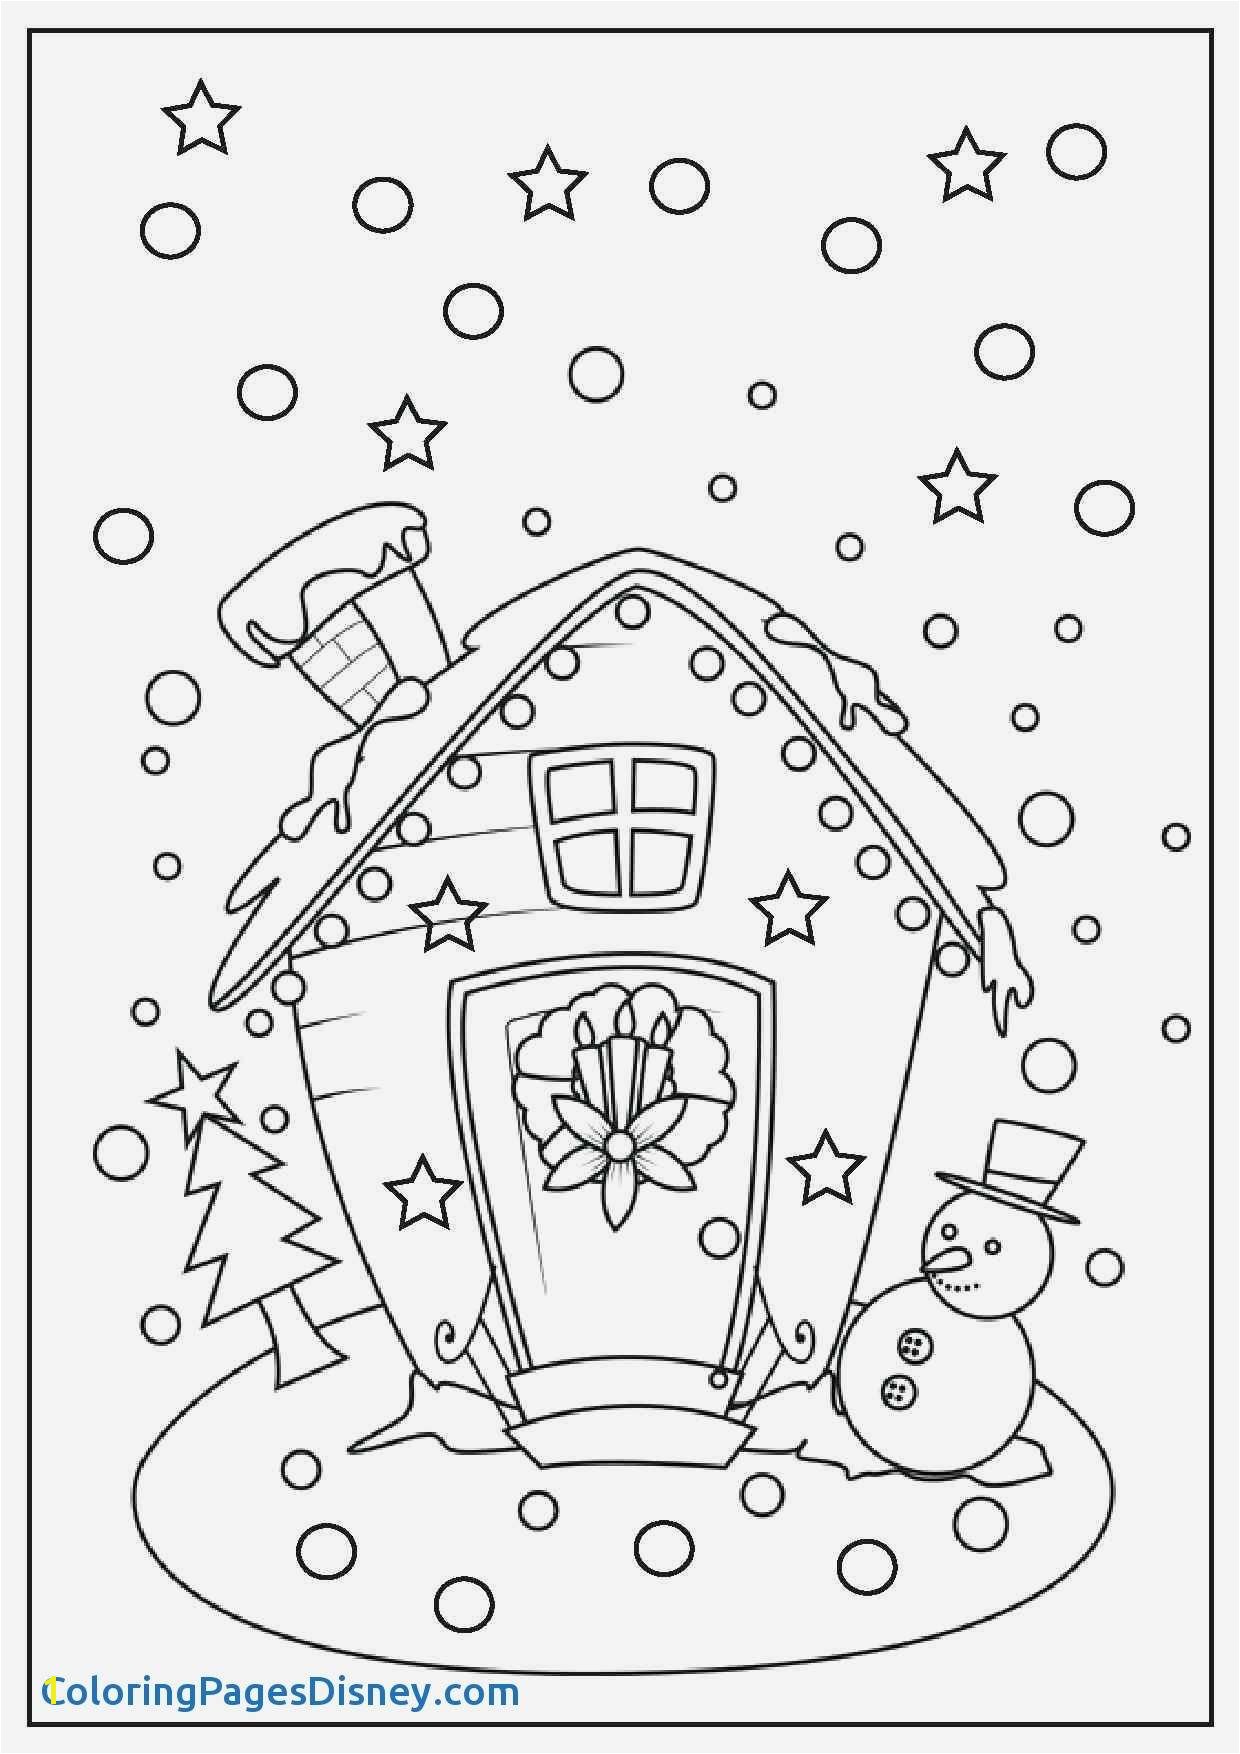 Youtuber Coloring Pages Coloring Pages Free Printable Coloring Pages for Children that You